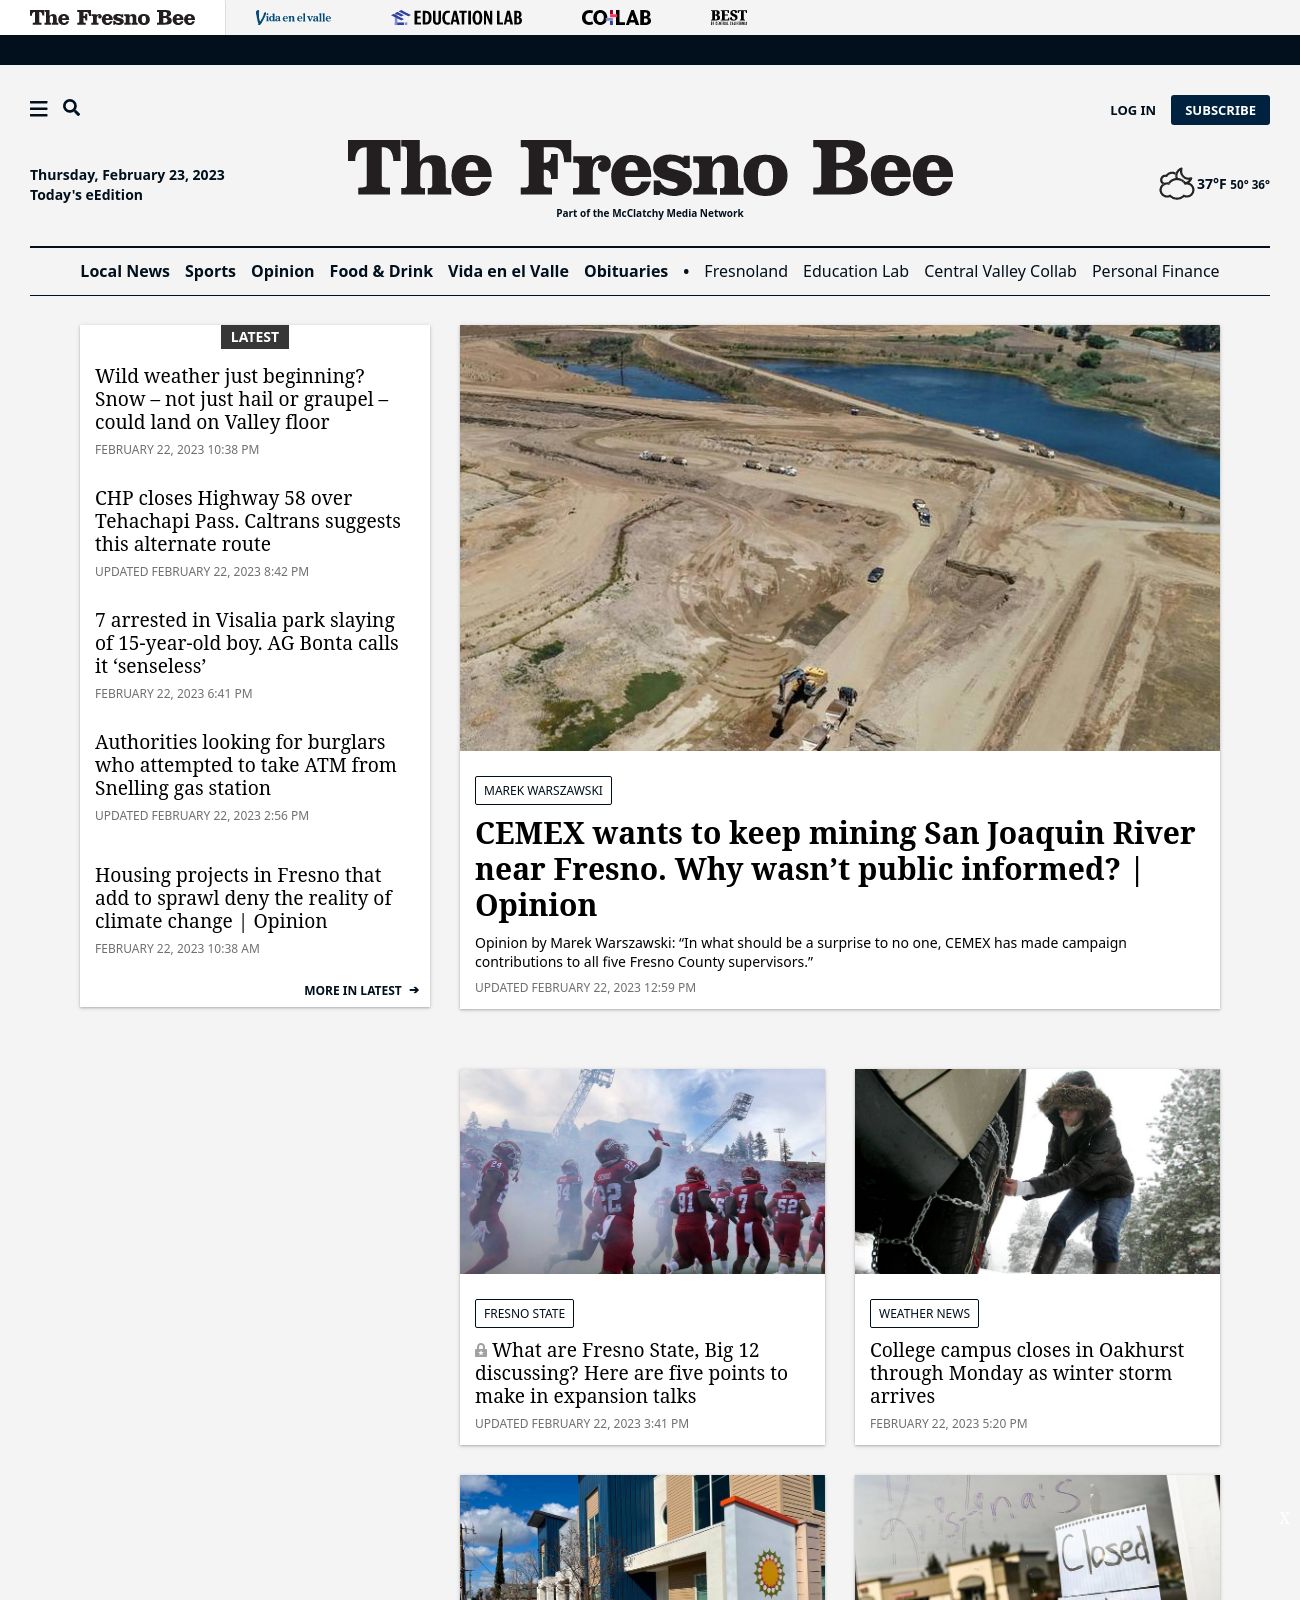 The Fresno Bee at 2023-02-23 02:58:23-08:00 local time